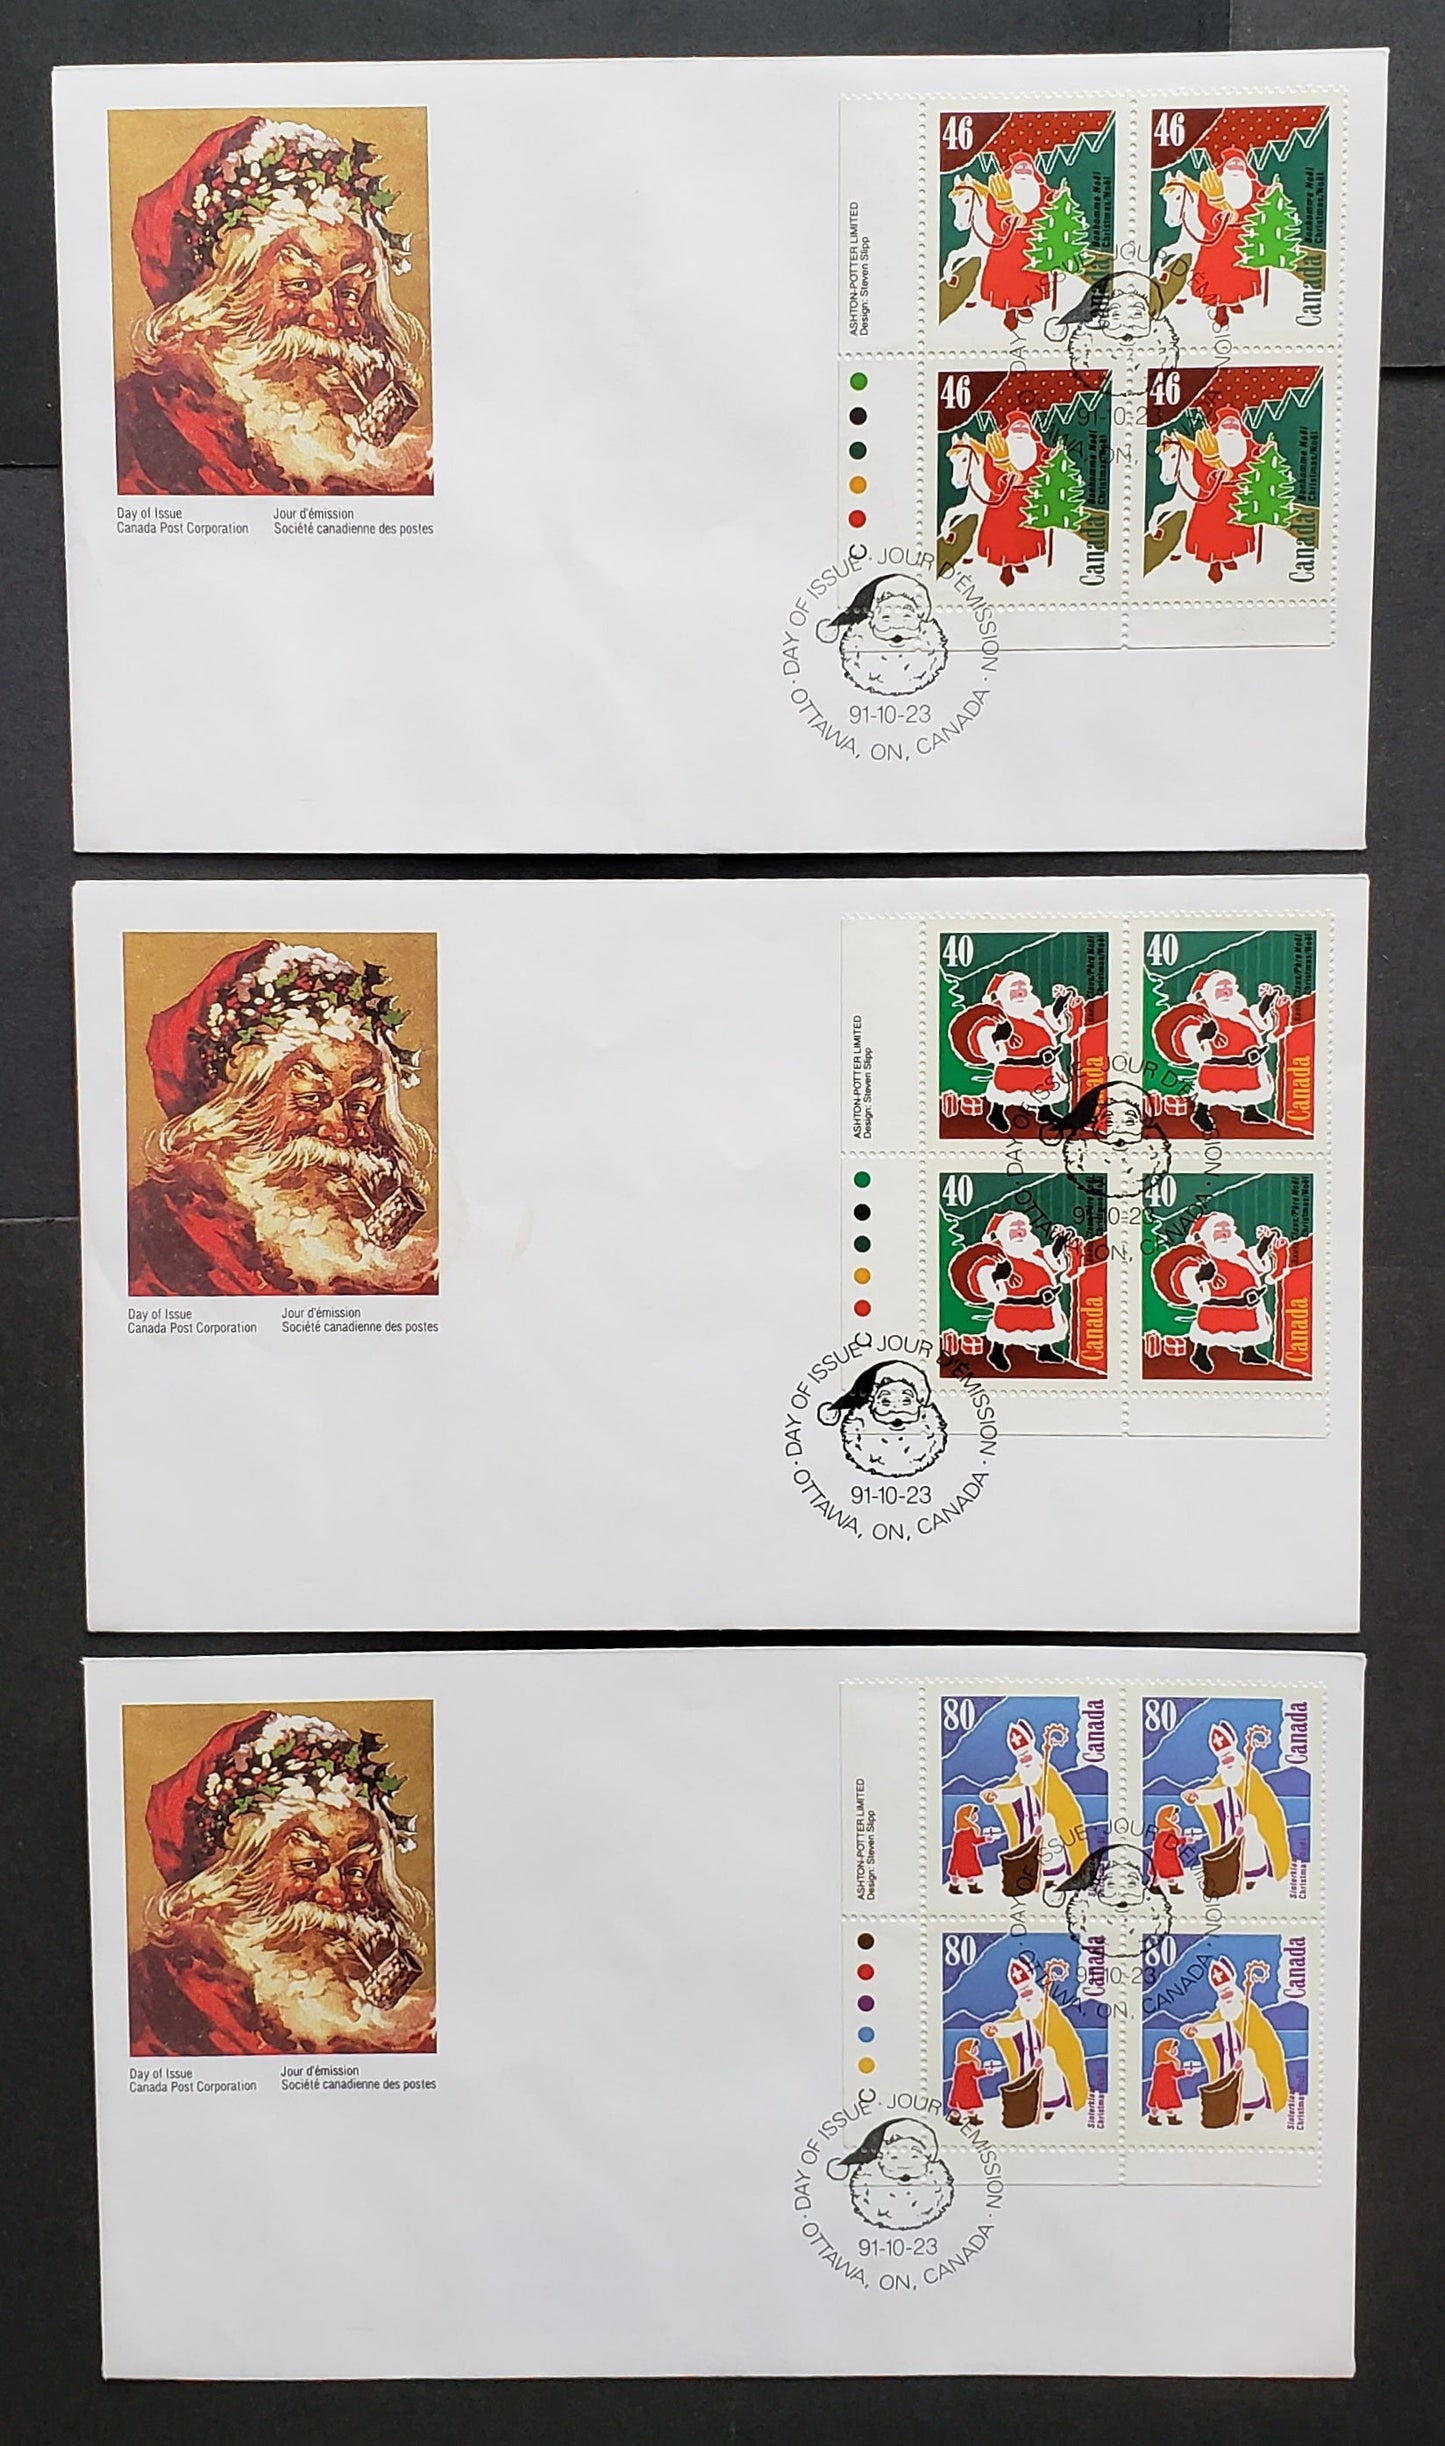 Lot 97 Canada #1339-1341 40c-80c Multicolor 1991 Christmas Issue, 3 Canada Post FDC's Franked With LL Inscription Blocks, Approx 22,000 Of Each Produced, Cat. Value $12.9